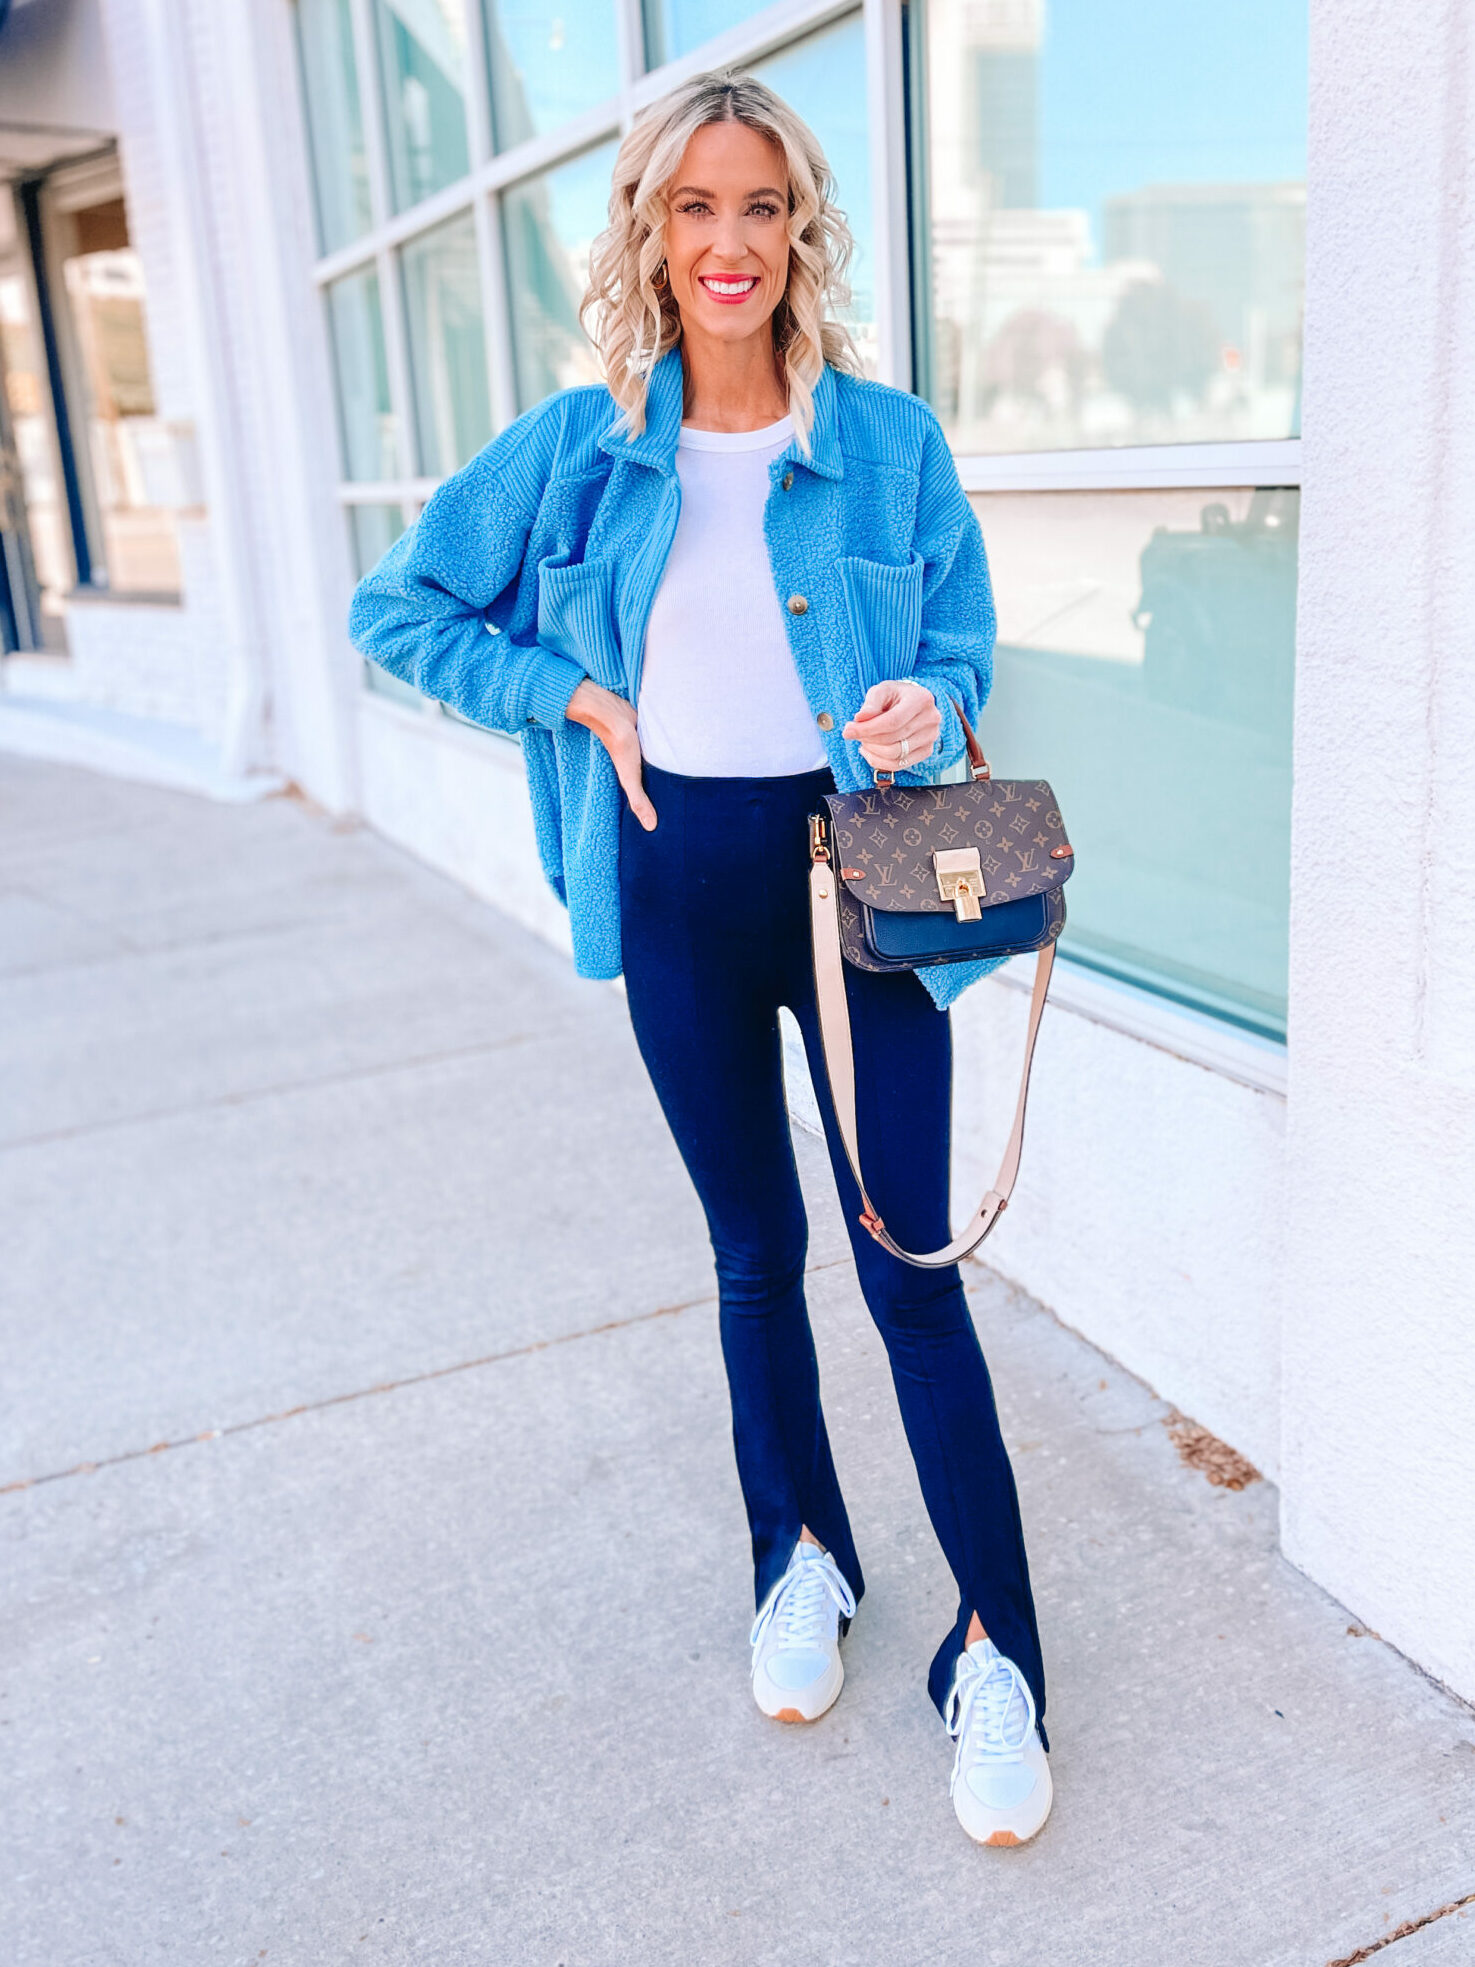 blue flares  Leggings outfit casual, Flares outfit, Flared pants outfit